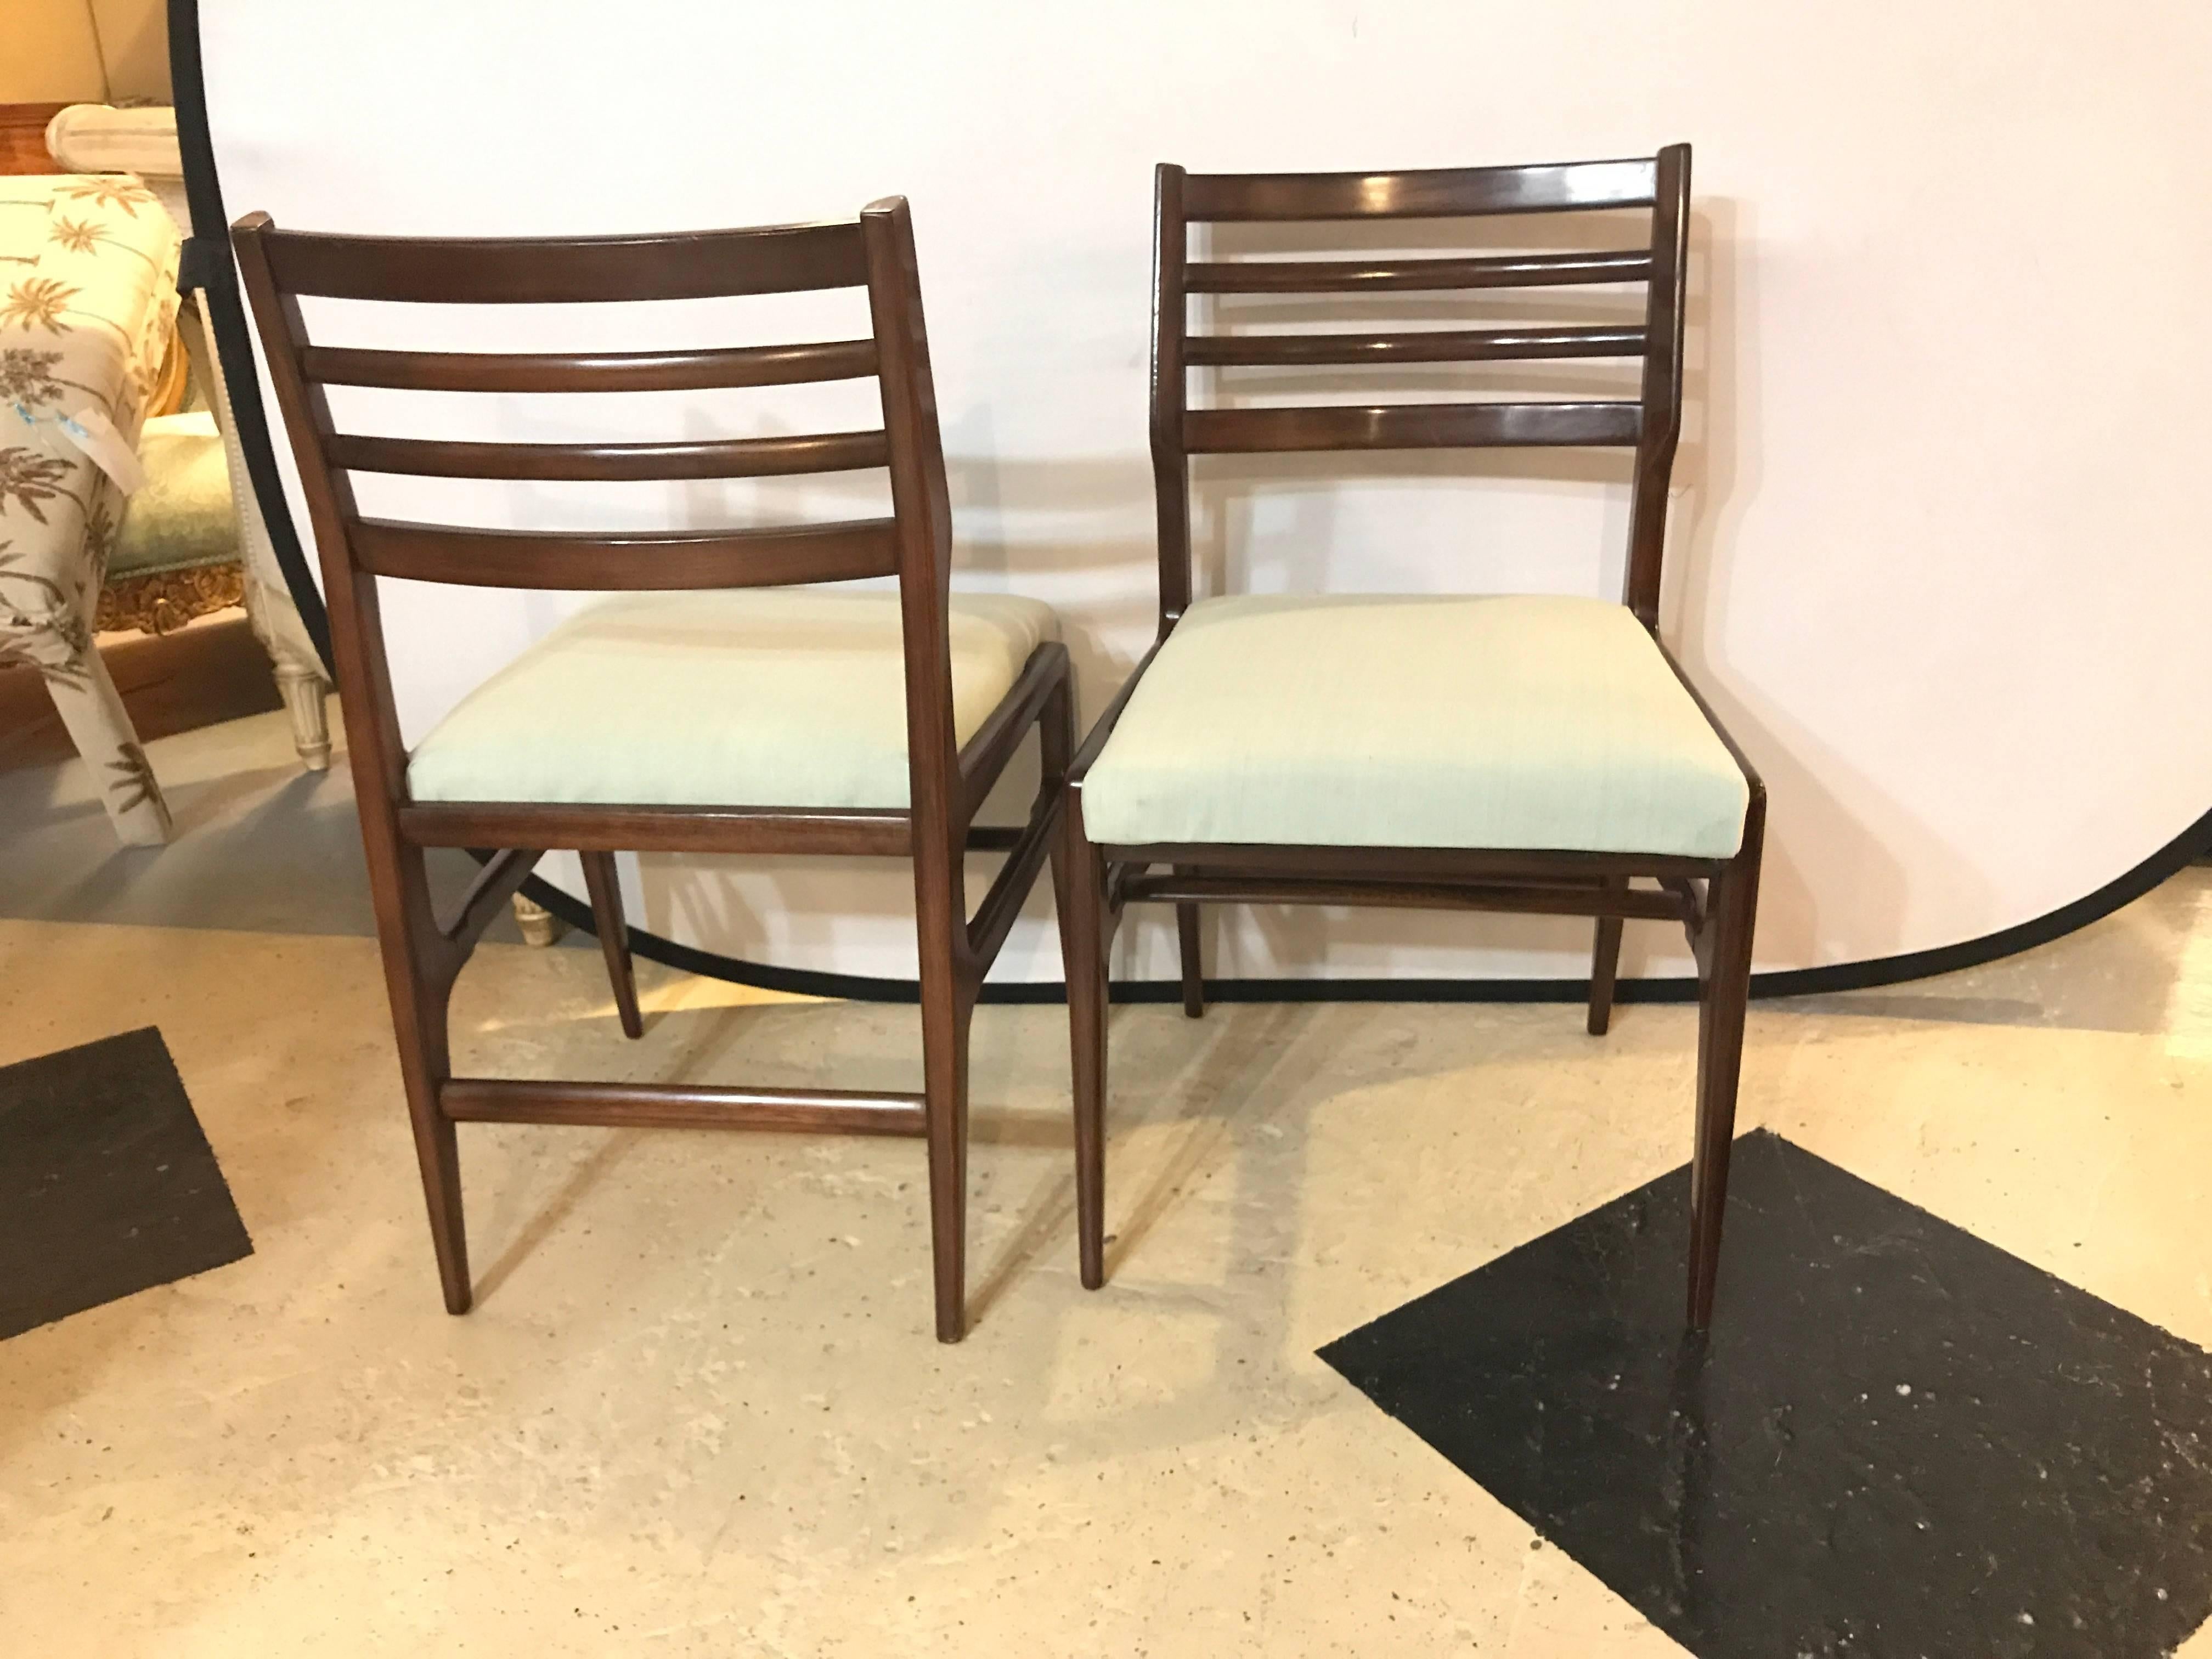 Set of Six Mid-Century Modern Rosewood Dining Chairs by R'way Furniture 1